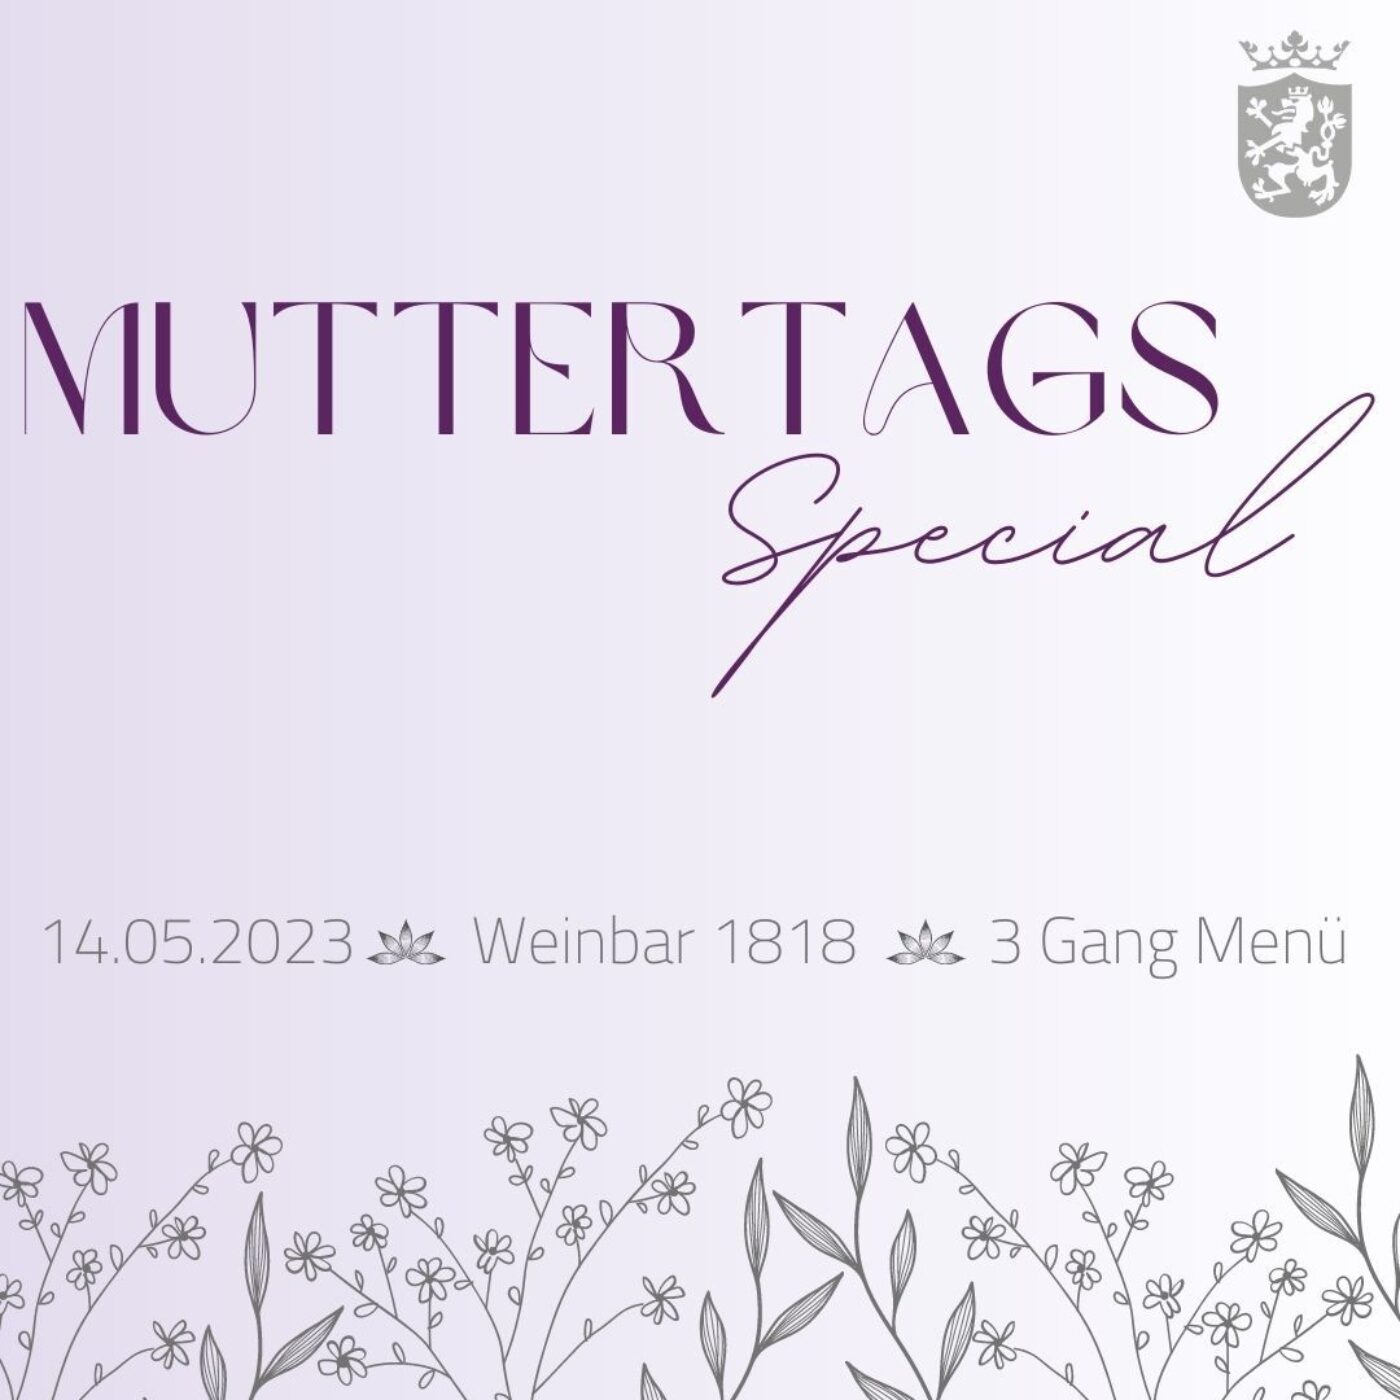 Muttertags-SPECIAL"